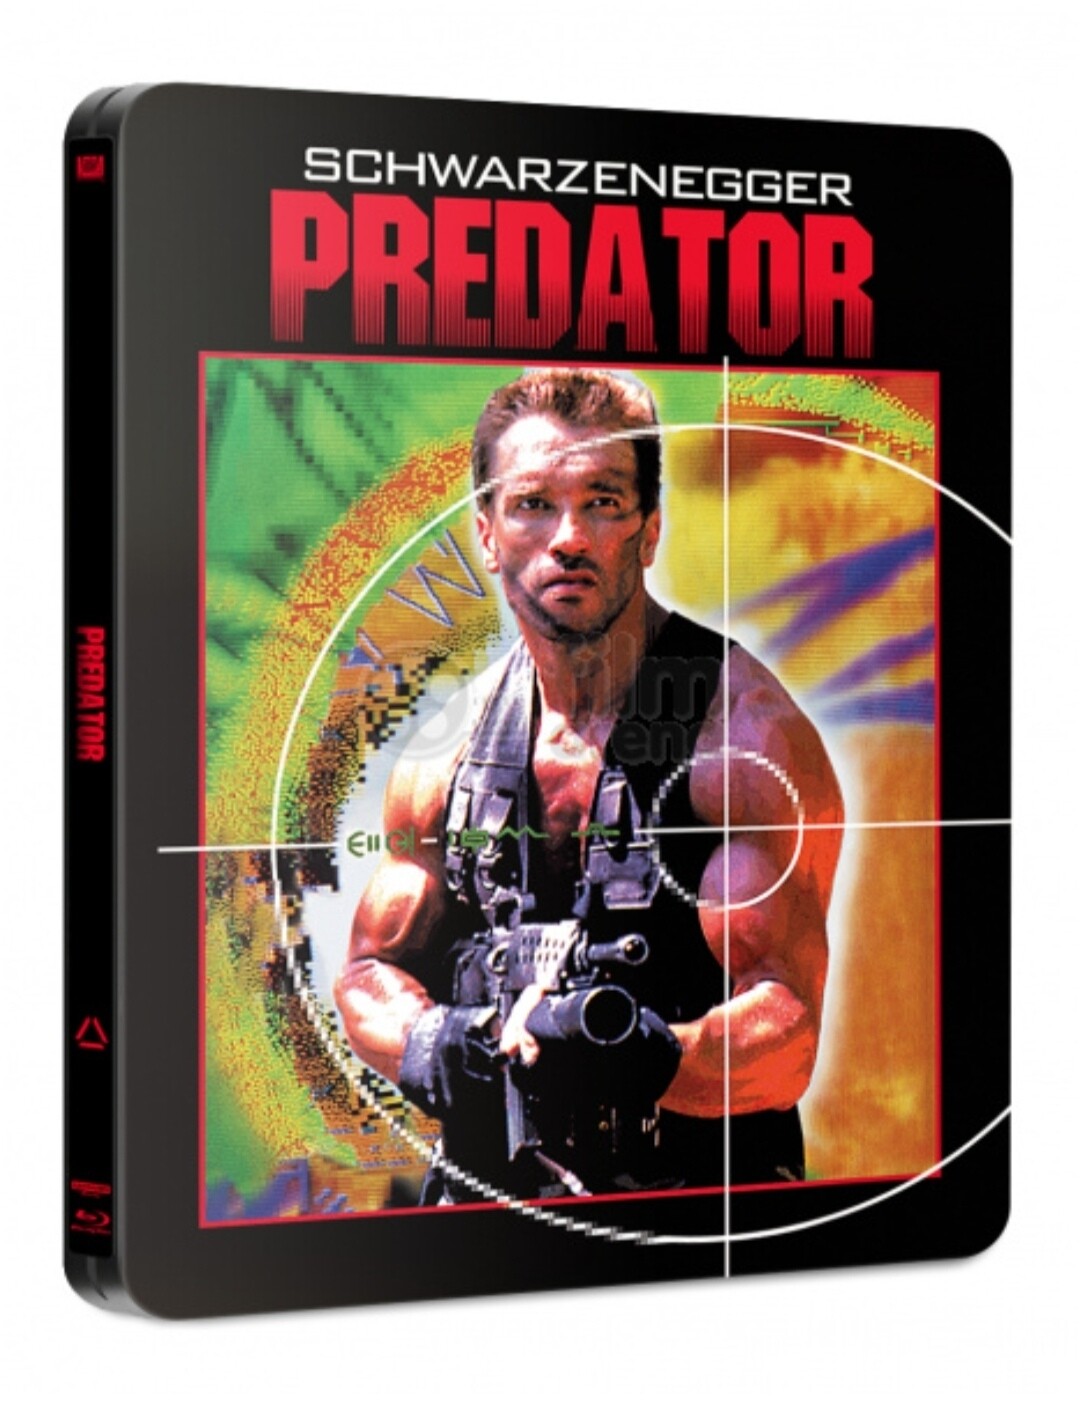 FAC #158 PREDATOR EDITION #5 Limited Exclusive WEA Steelbook™ Limited Collector's Edition (4K Ultra HD + Blu-ray)